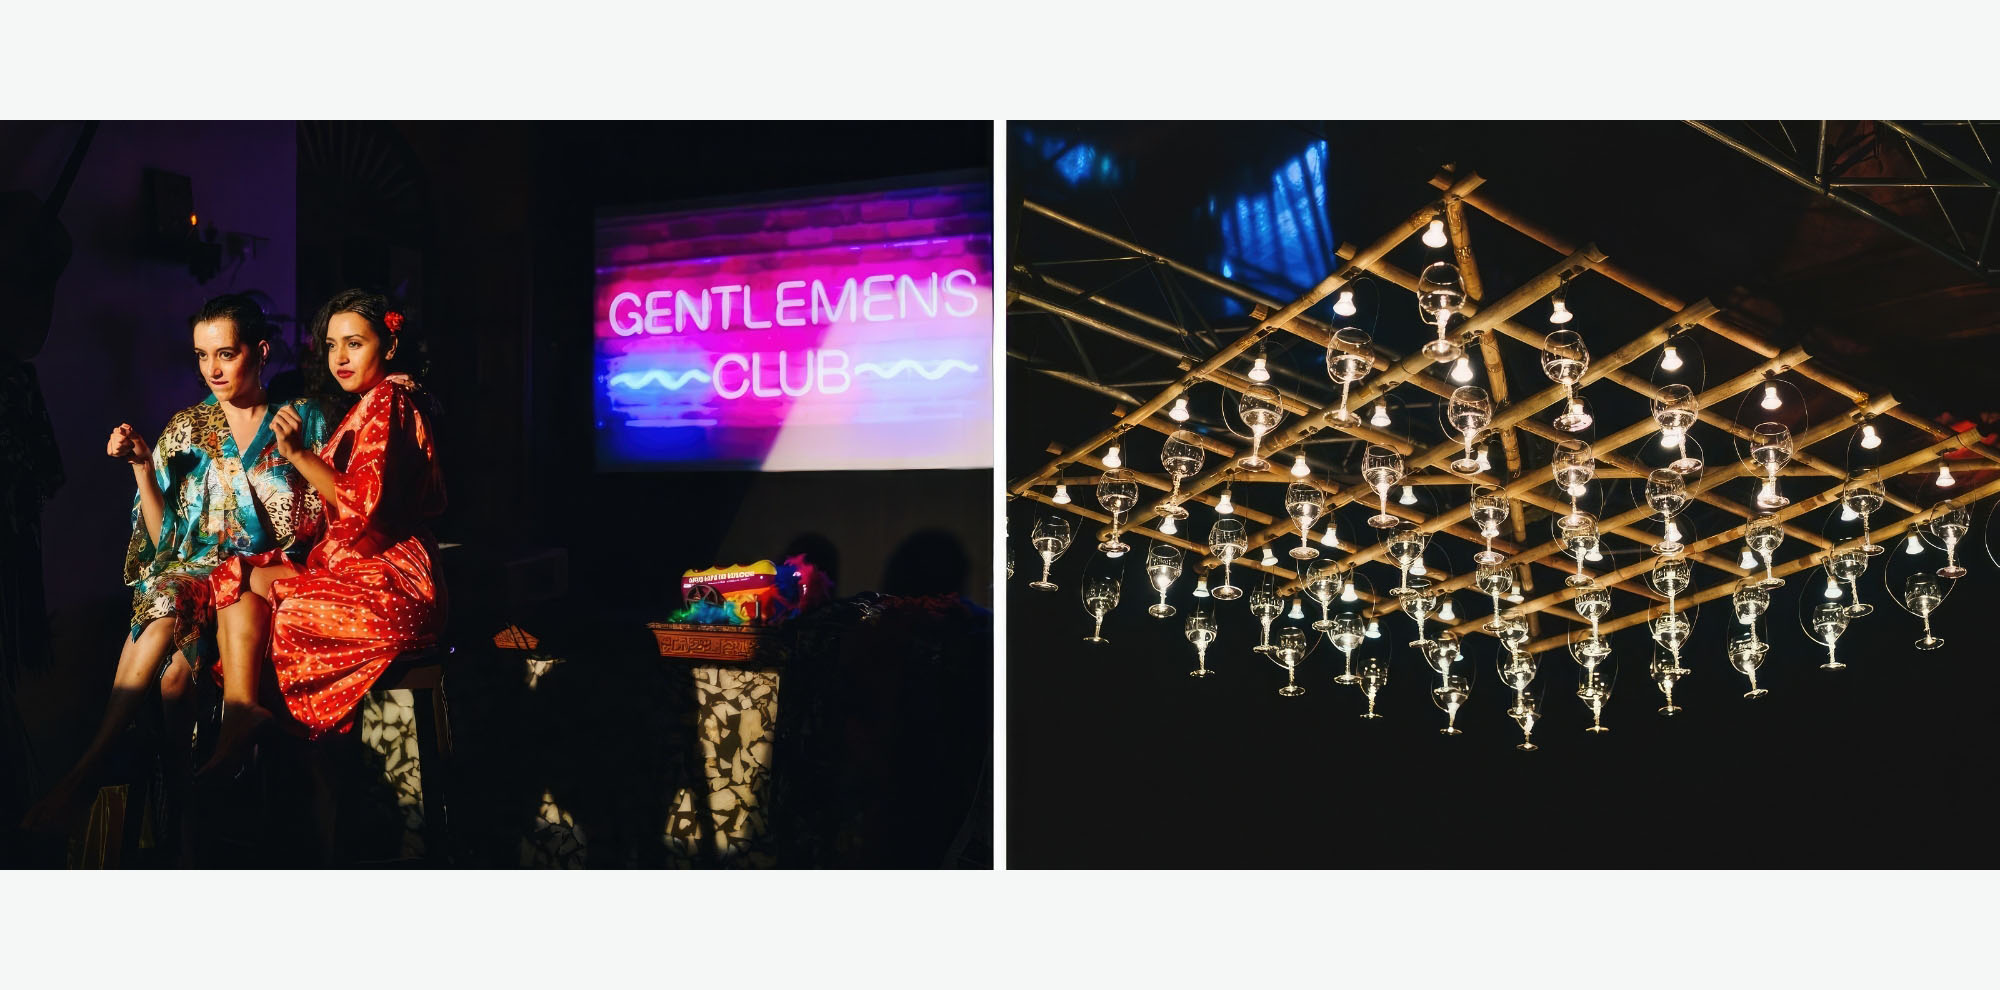 A collage where the left photograph shows two women seated under a spotlight with a neon pink sign that reads, ‘Gentlemen’s Club’ in the background. The right photograph shows a wooden frame chandelier with alternating bulbs and wine glasses hanging from the ceiling.